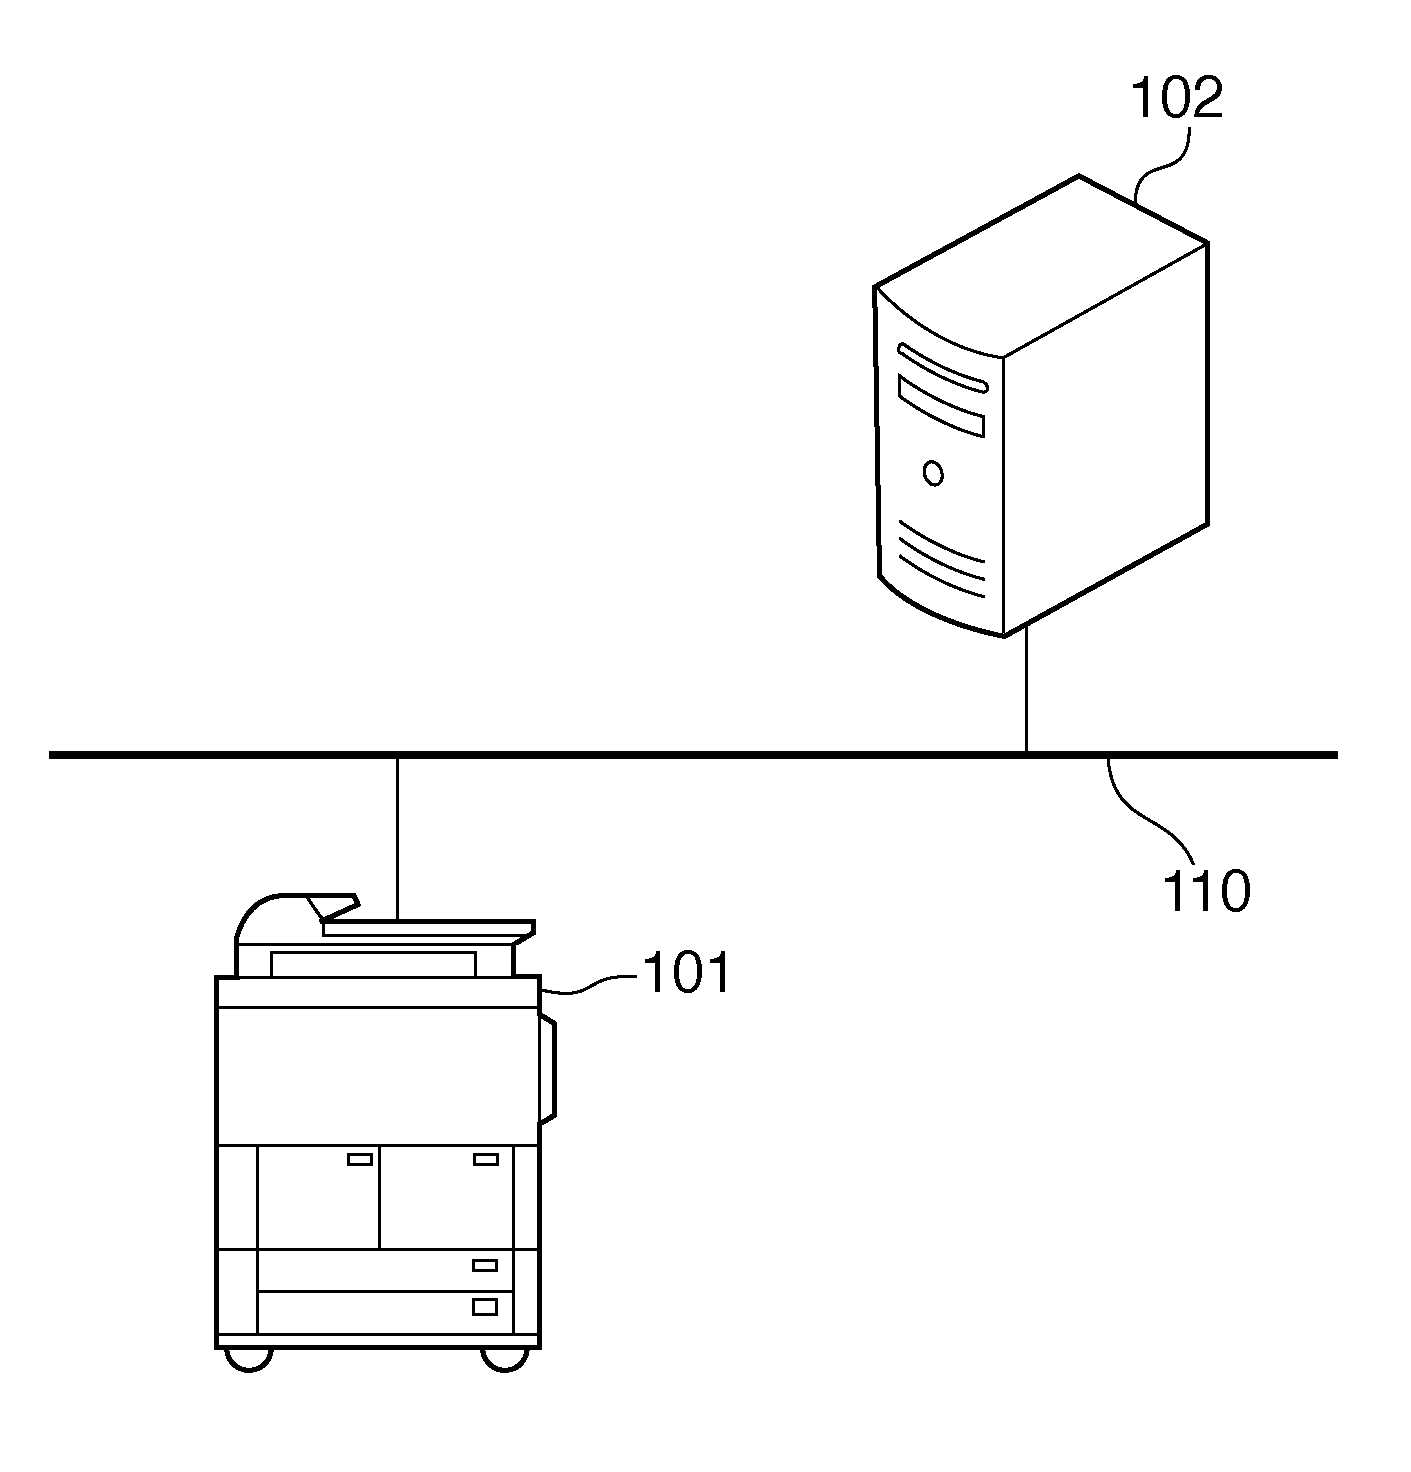 Restricting a screen transition instruction based on a status of execution of a job instructed by a web server